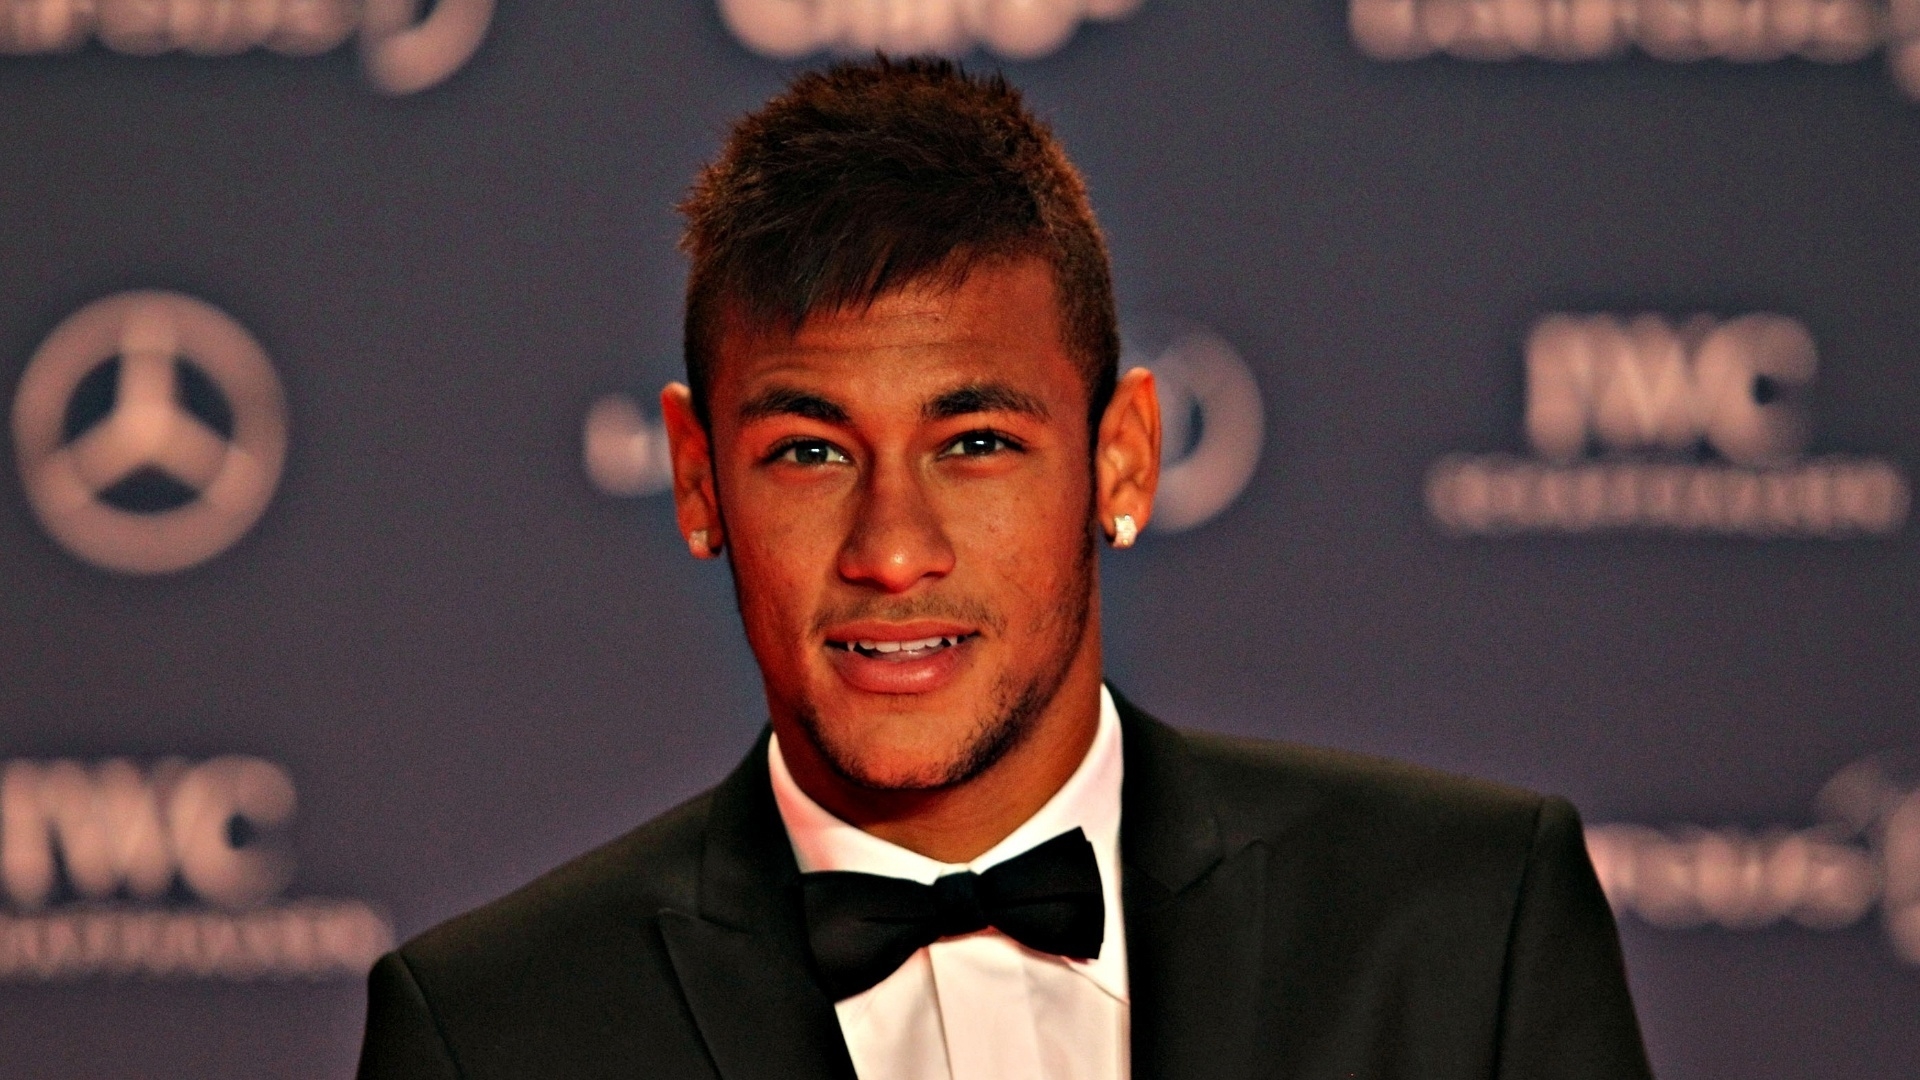 Neymar Suit and Bowtie for 1920 x 1080 HDTV 1080p resolution